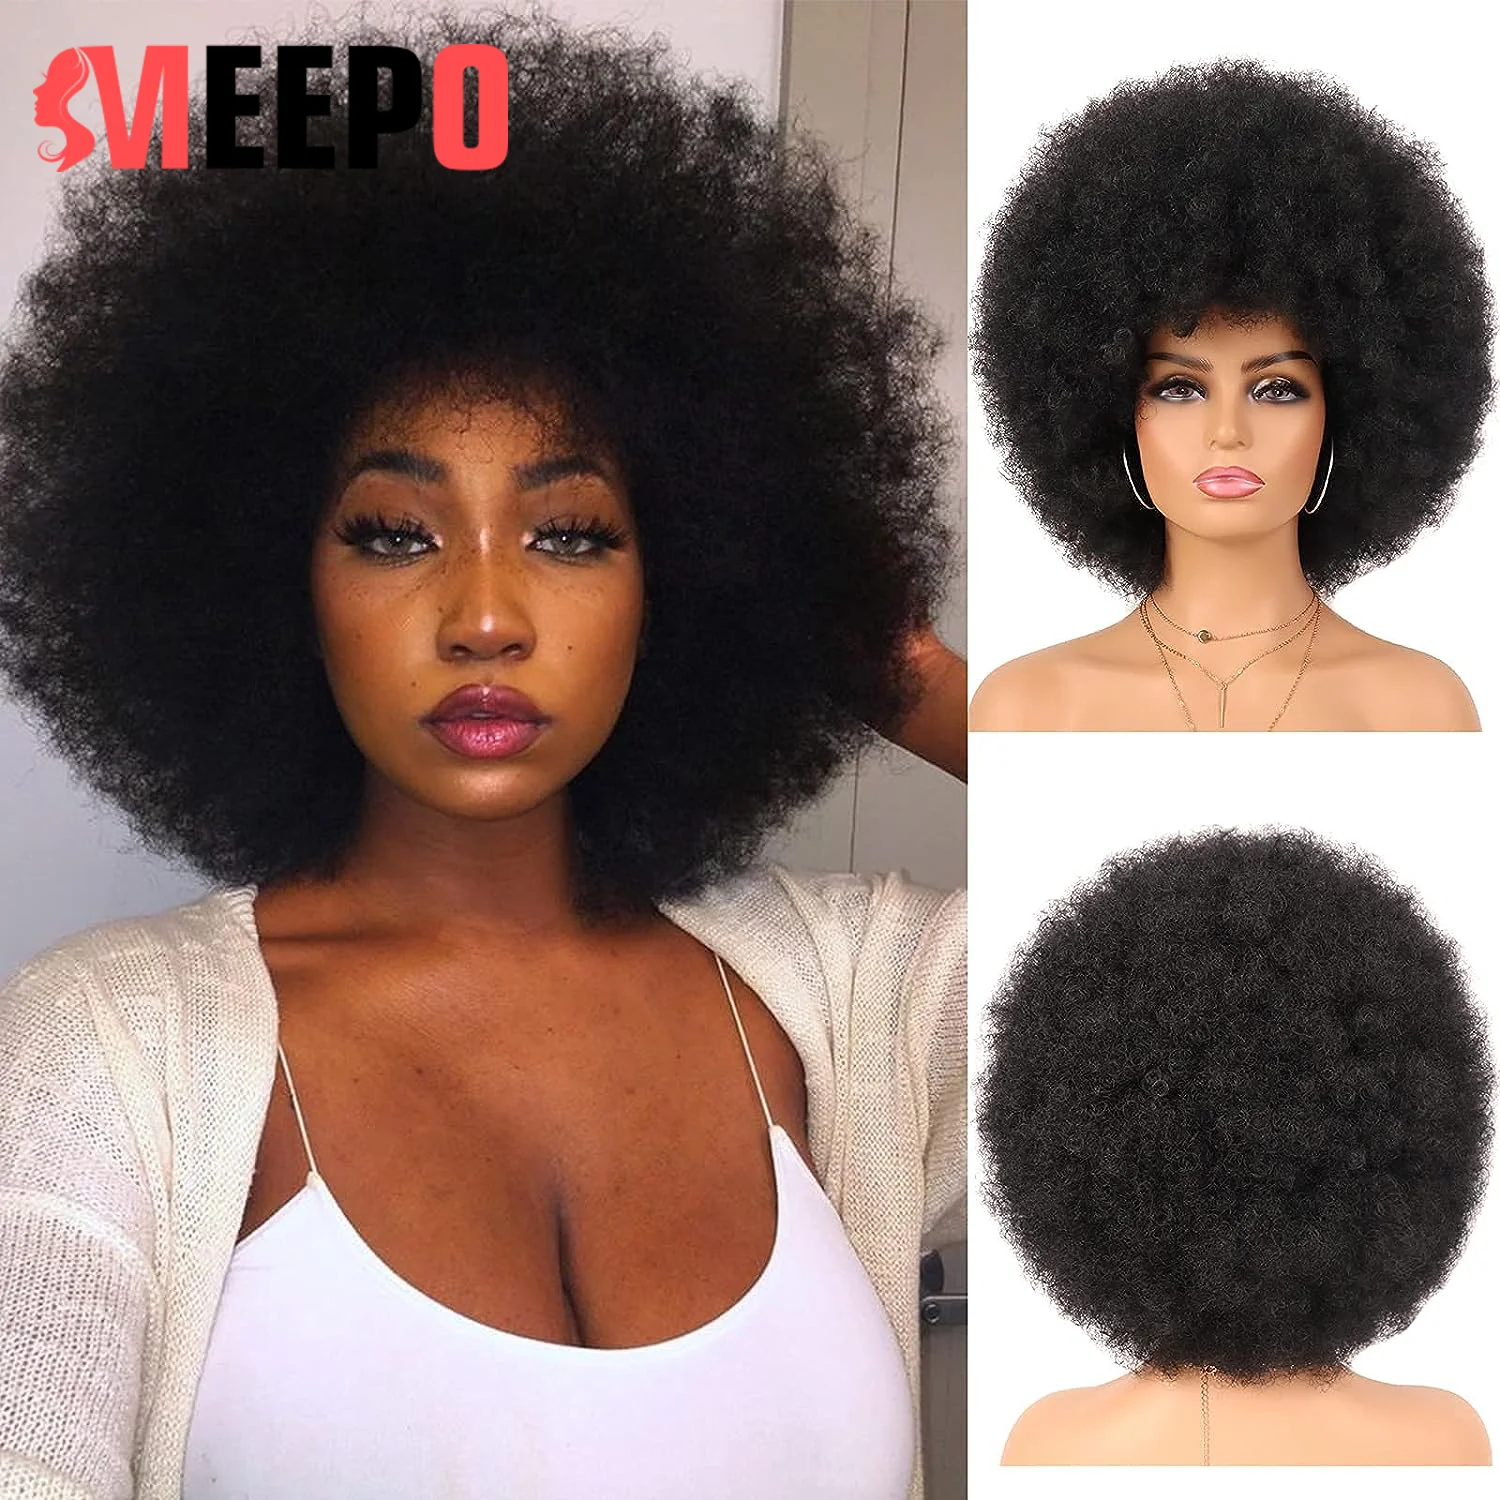 

Meepo 14Inch Short Synthetic Afro Wigs Black Bob Soft Hair Boom Hair Cosplay Afro Kinky Curly Wig With Bangs For Black Women